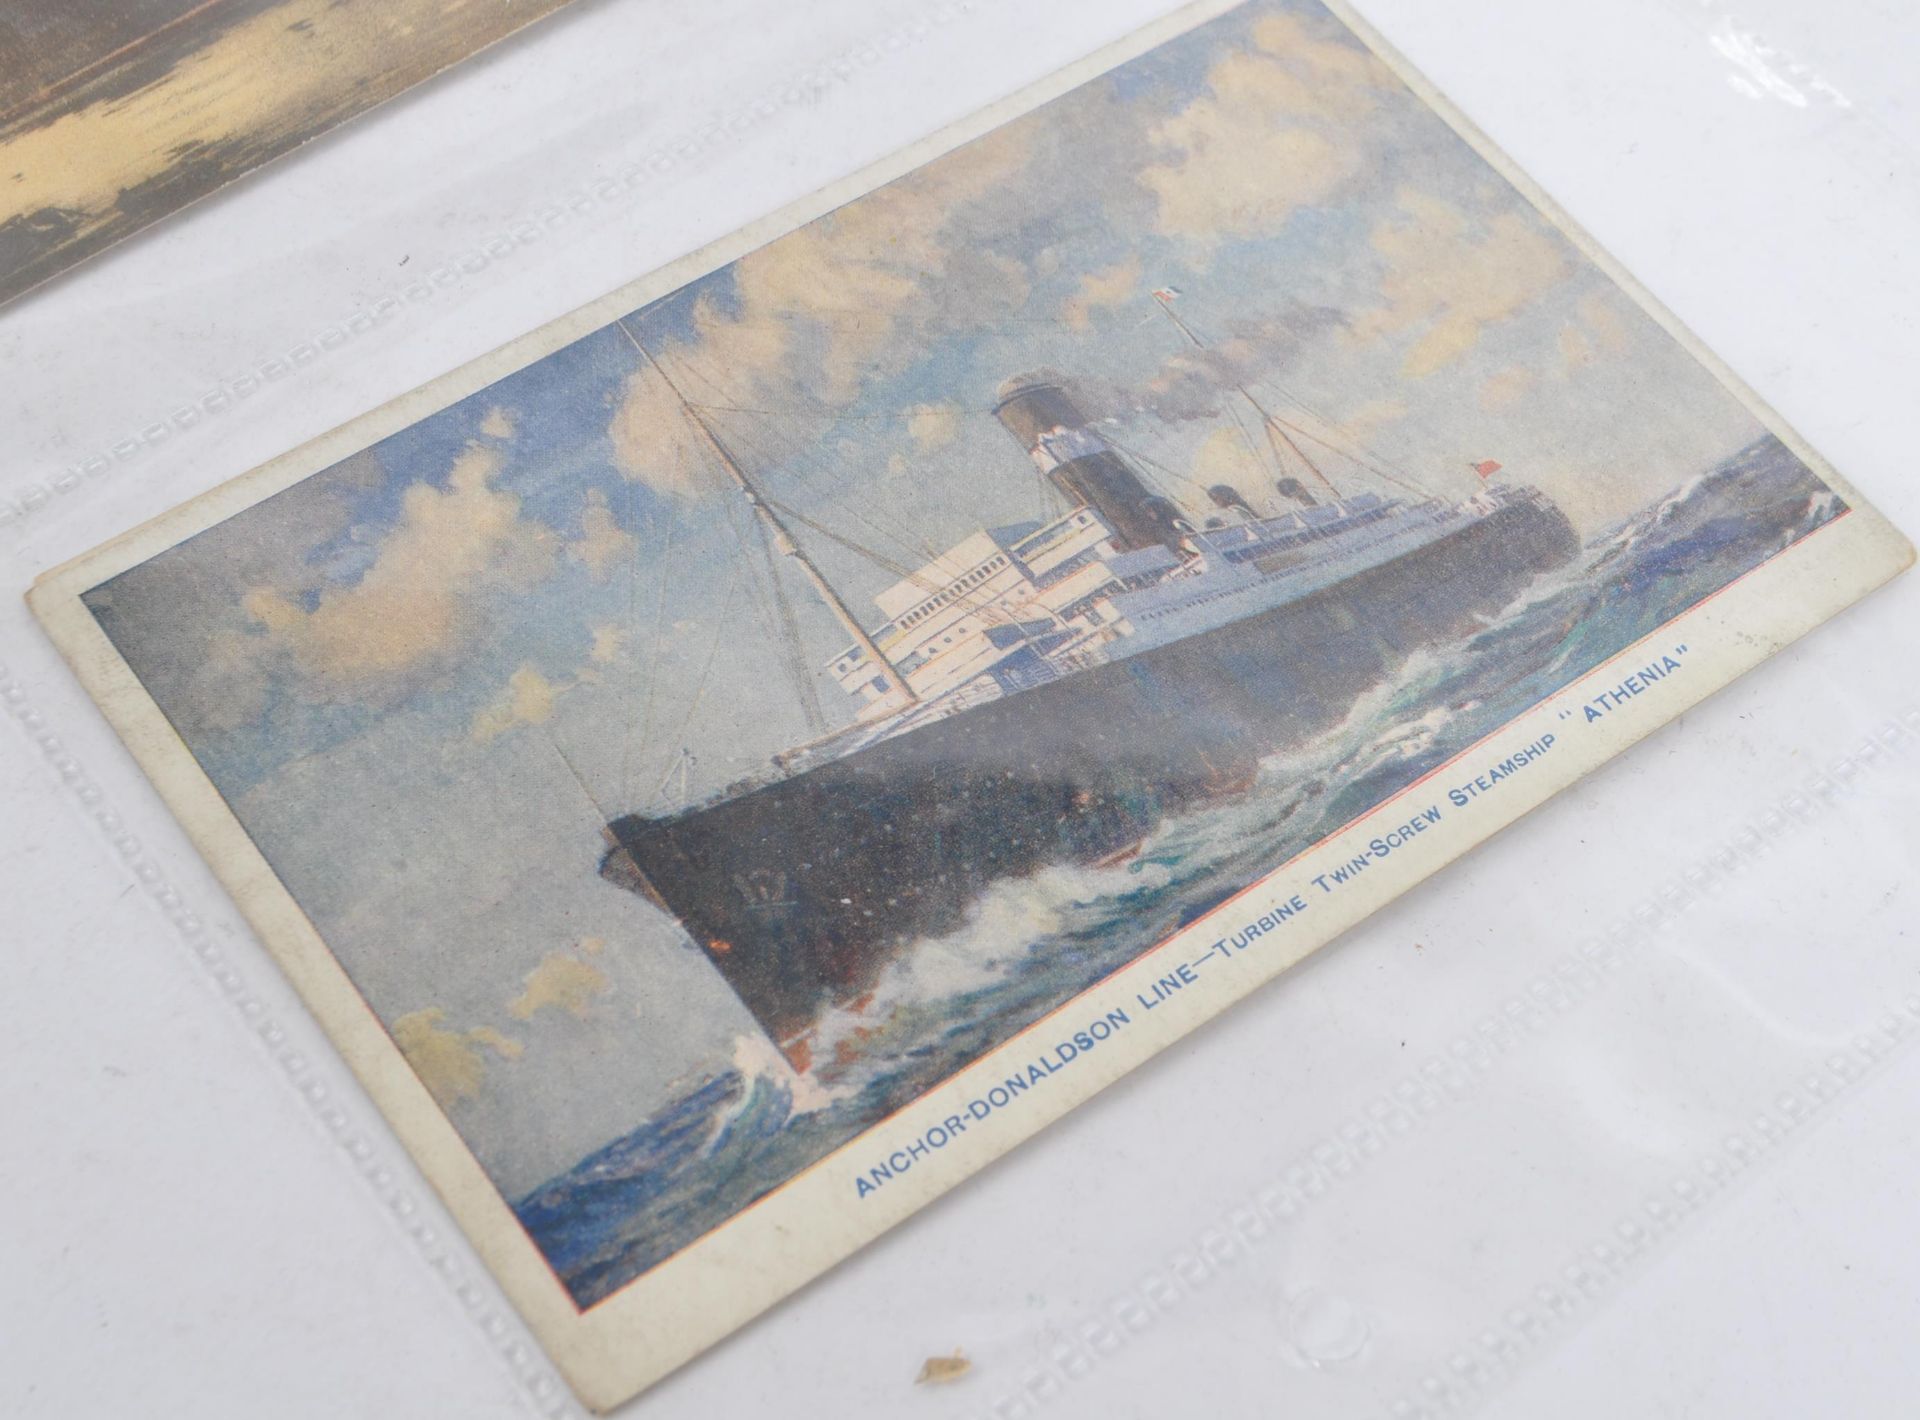 Shipping postcards - collection of 20th century all eras, in album and pages. Approx. 200. - Image 10 of 10